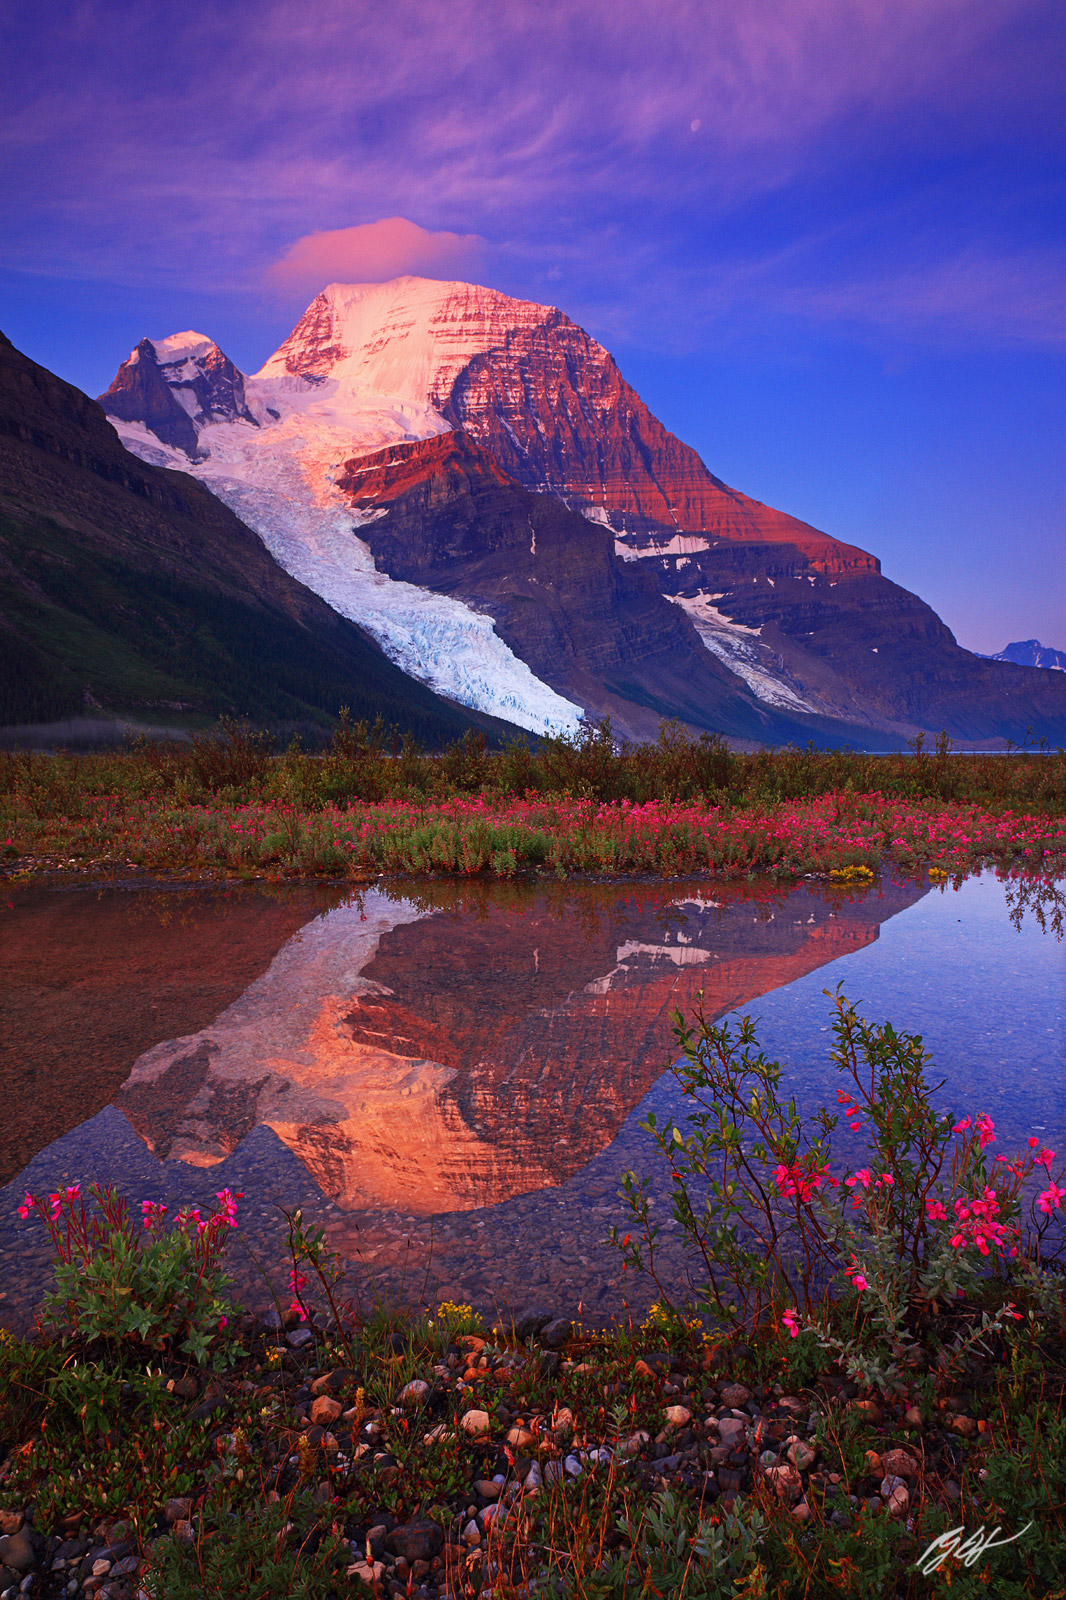 Sunrise Mt Robson Reflected in Berg Lake, Mt Robson Provincial Park in Canada